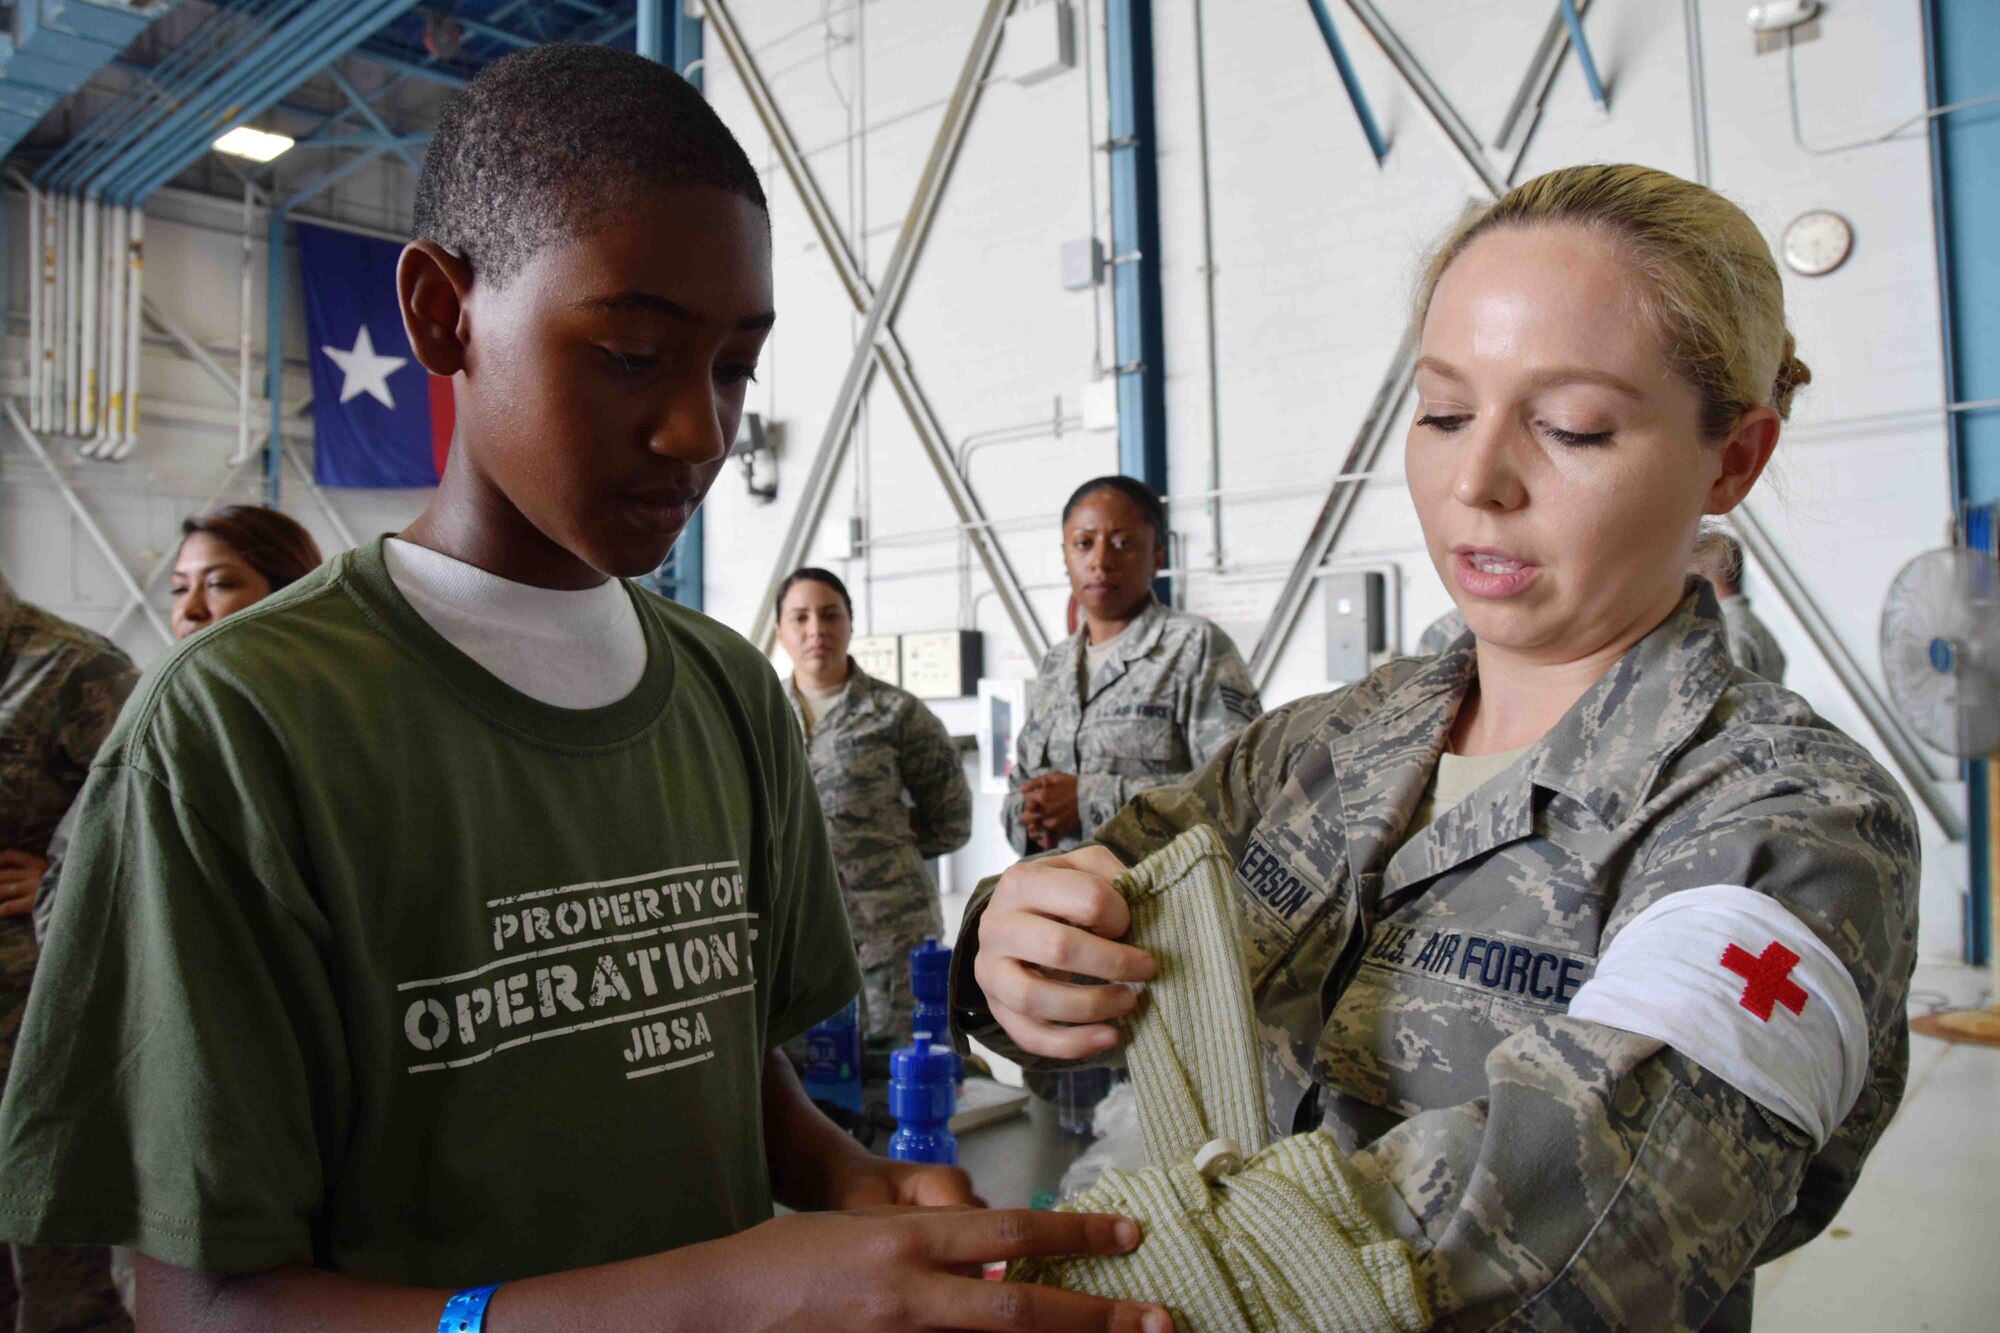 Blake Taylor applies a pressure bandage to Tech. Sgt. Cassandra Dickerson, 433rd Aeromedical Staging Squadron, after learning the proper technique from her and why it is used. Taylor was one of 200 children who participated in Operation JET at Joint Base San Antonio-Lackland, Texas on July 31, 2015. (U.S. Air Force photo/Tech. Sgt. Carlos J. Trevino)